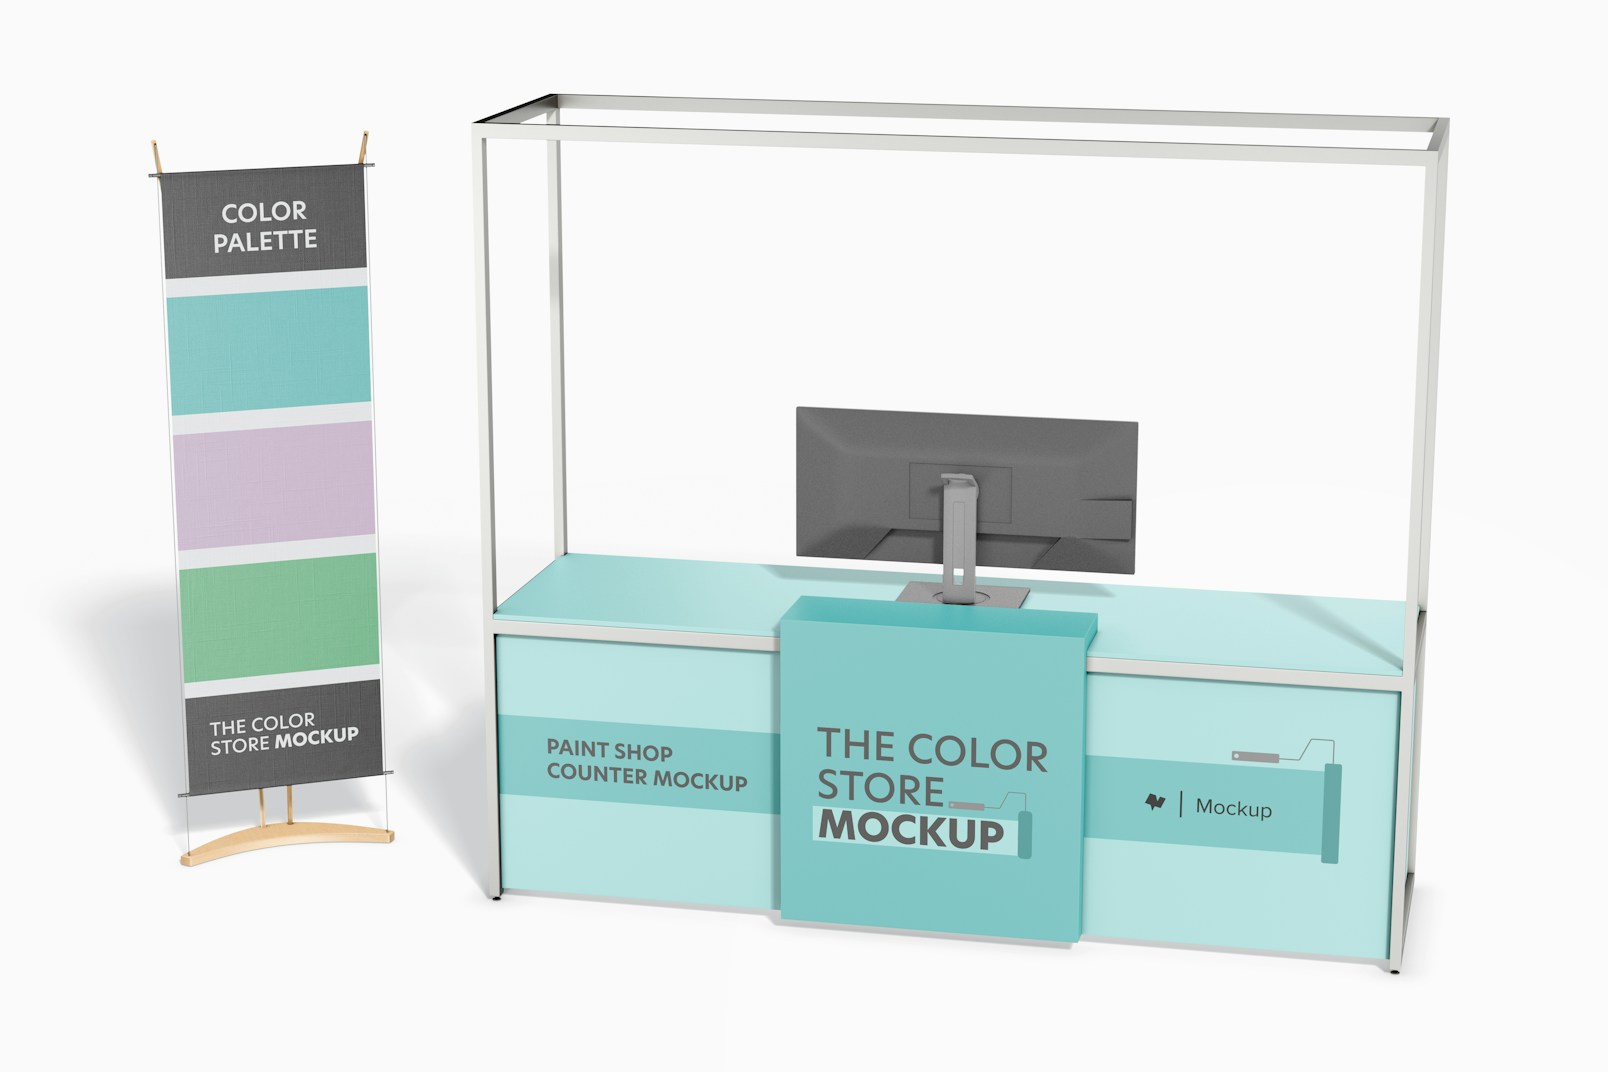 Paint Shop Counter Mockup, wiht Banner